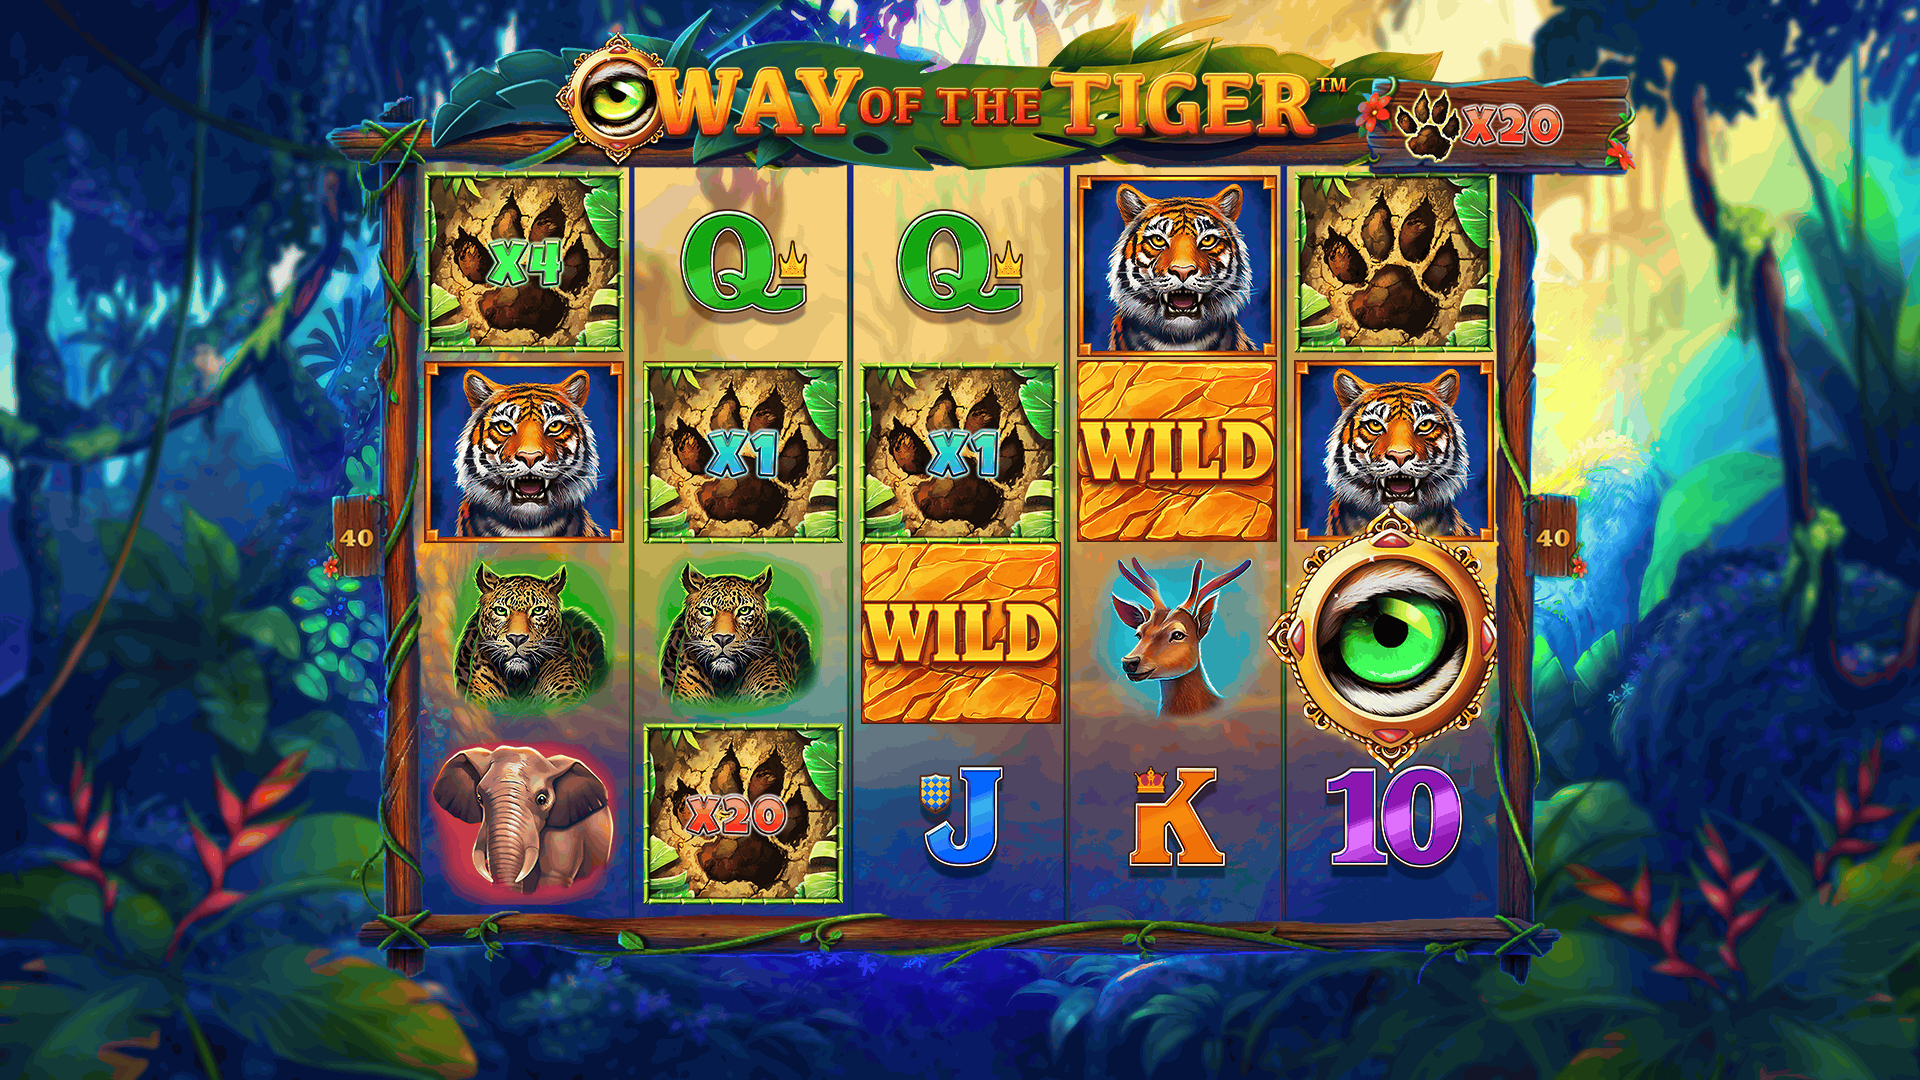 WAY OF THE TIGER